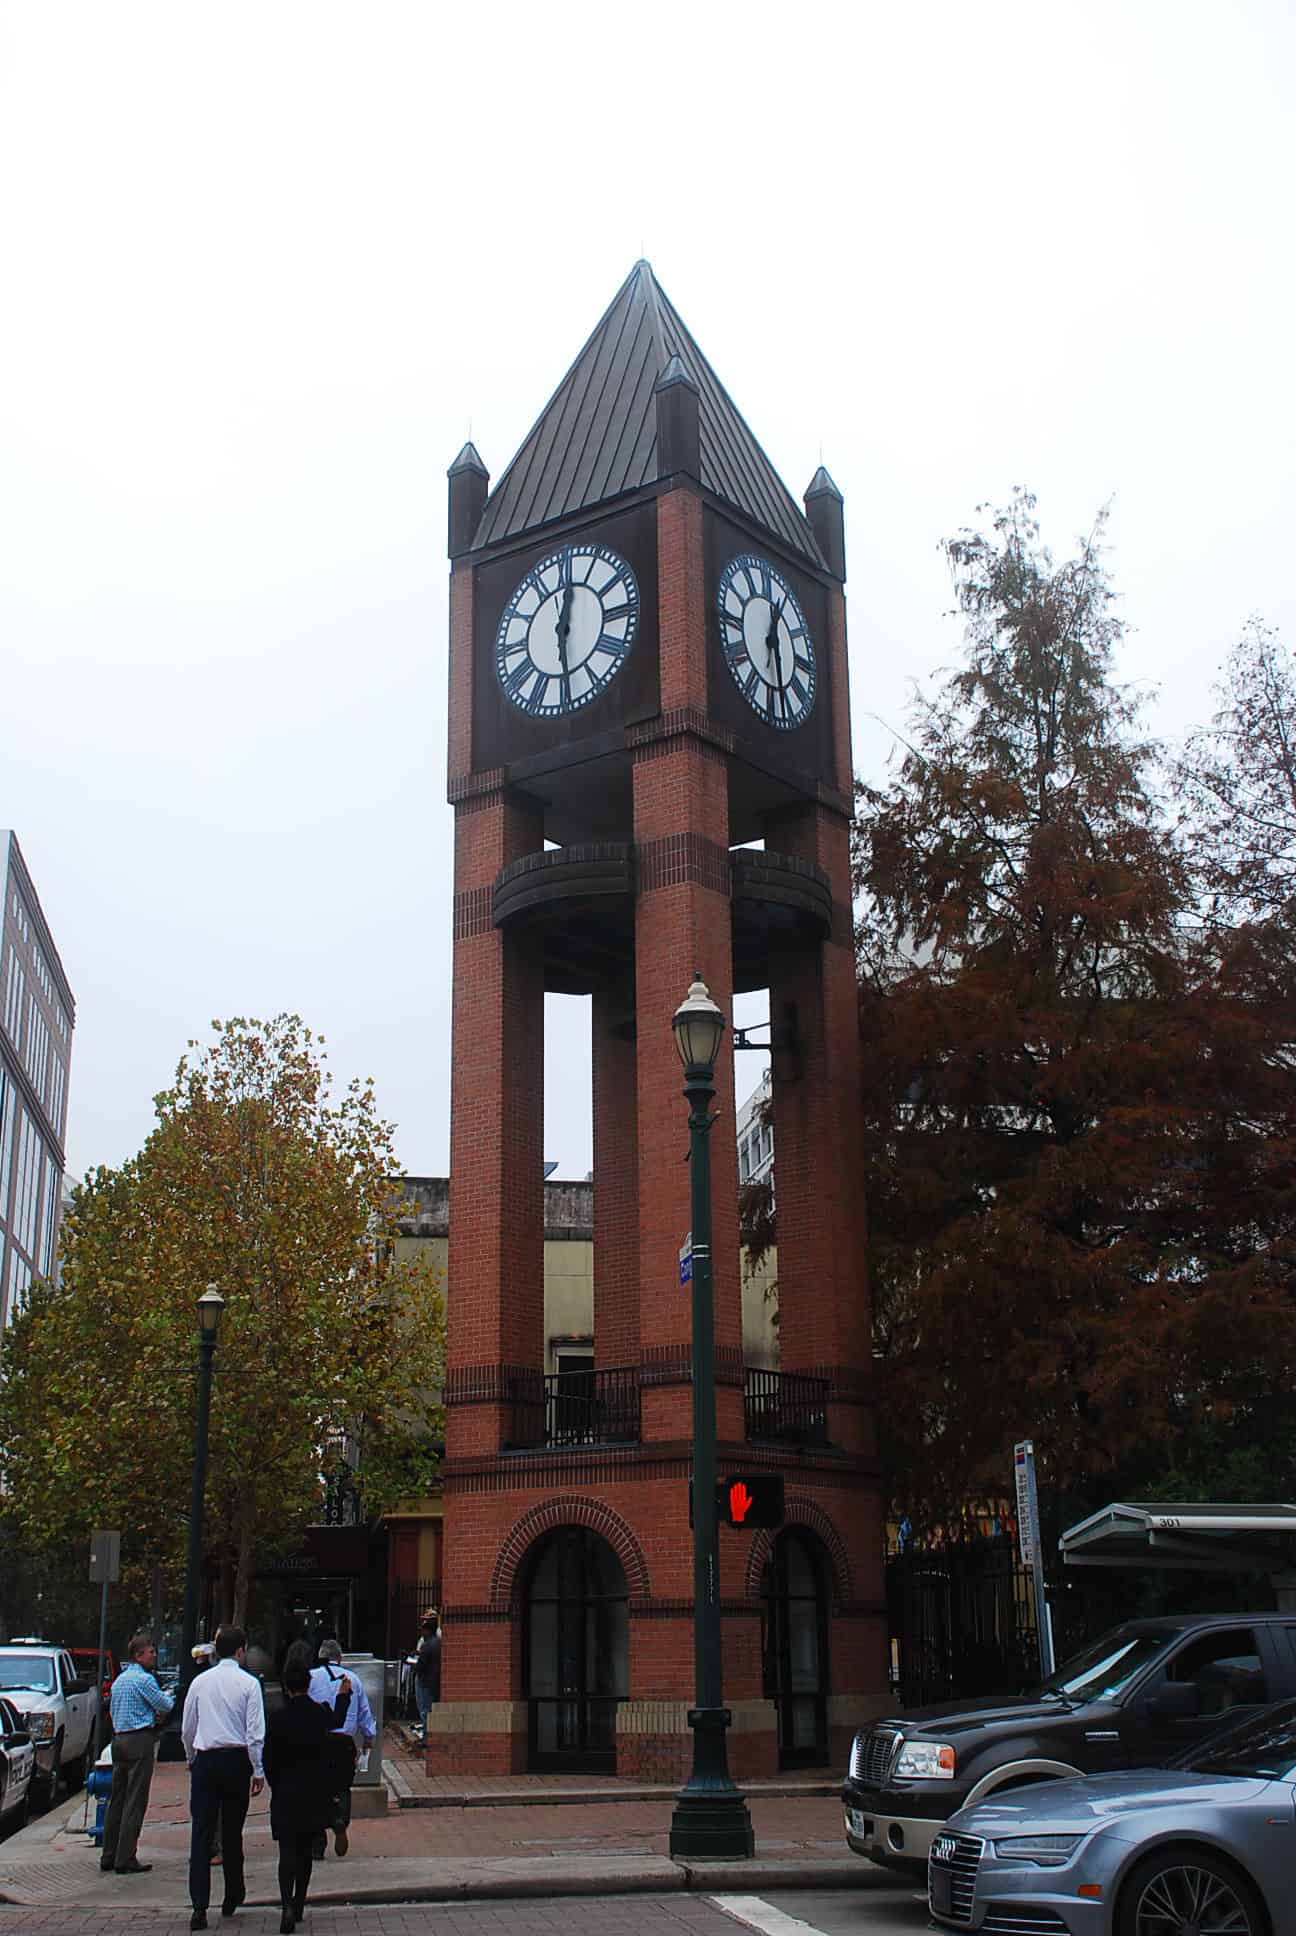 The Old City Hall Bell and Clock adjacent to Market Square Park